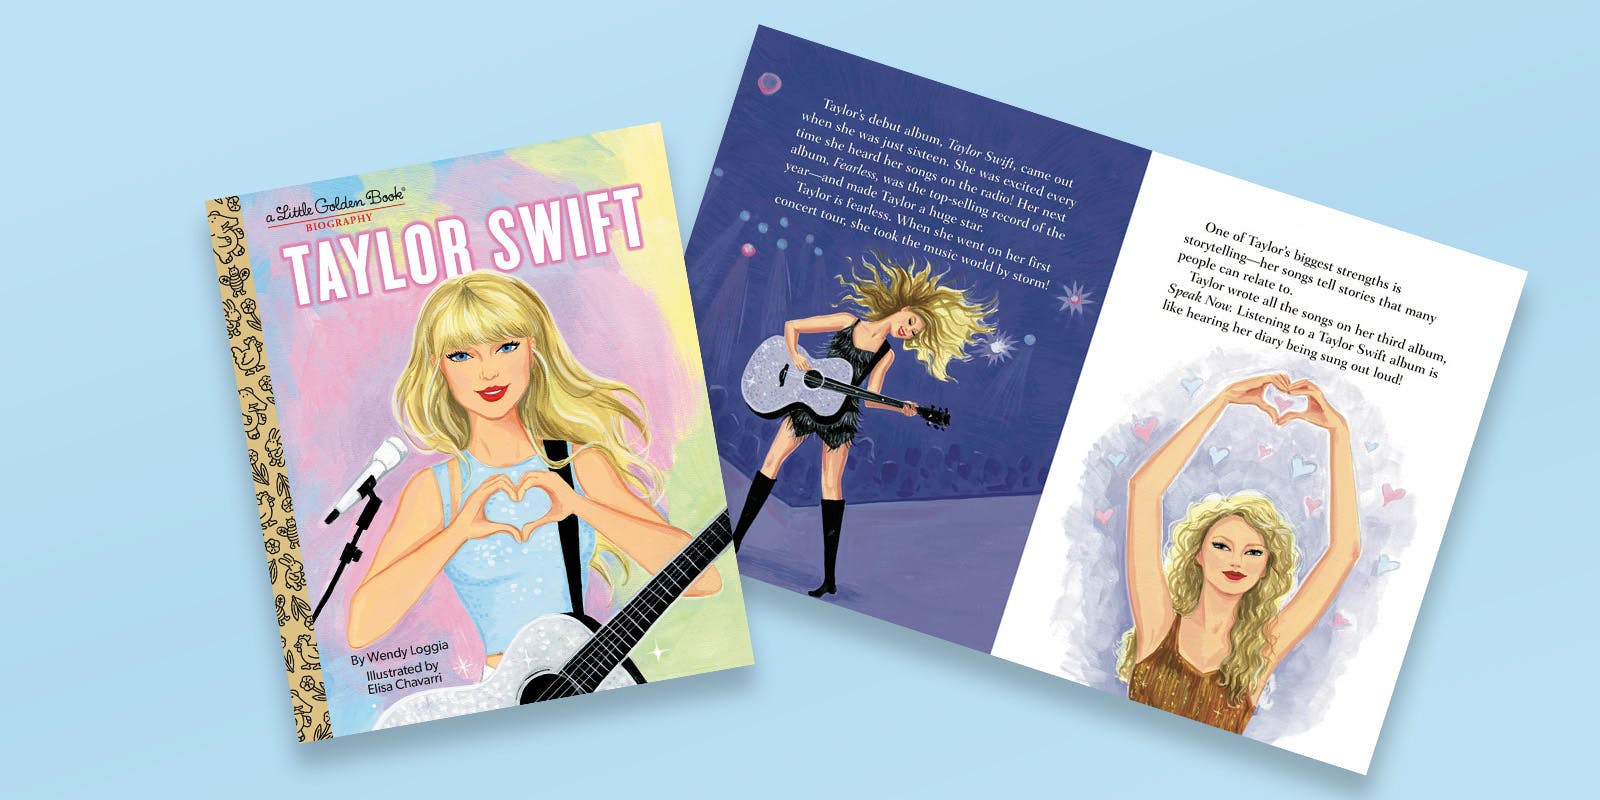 Did you know? Taylor Swift has her own Little Golden Book